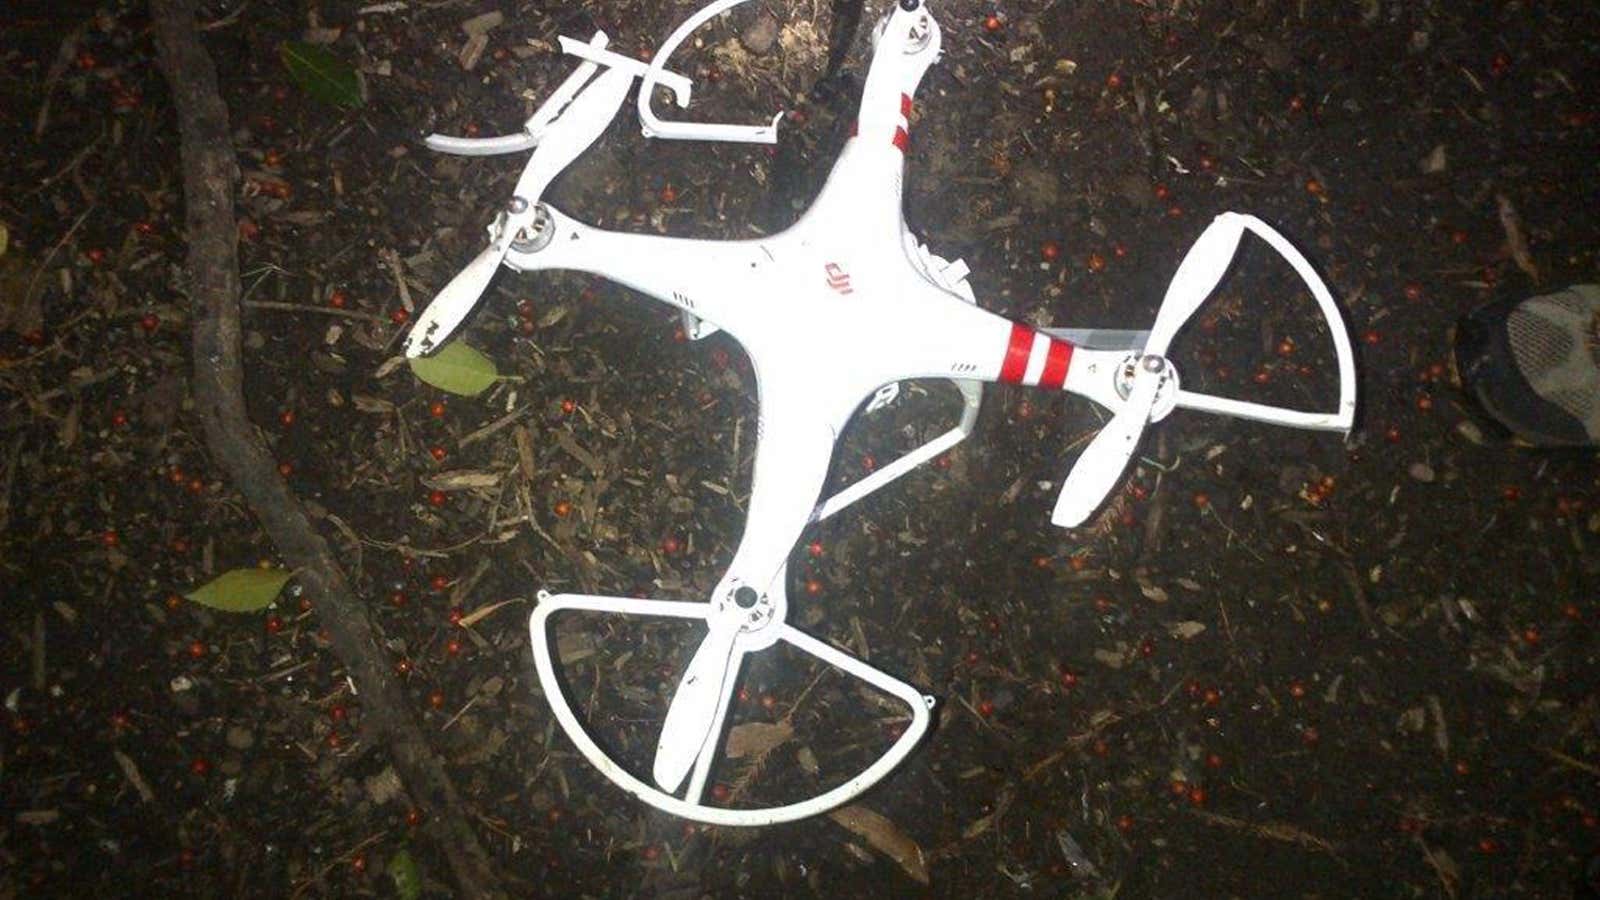 This drone crashed at the White House, which is forbidden airspace, but rules for the rest of the US lag behind.